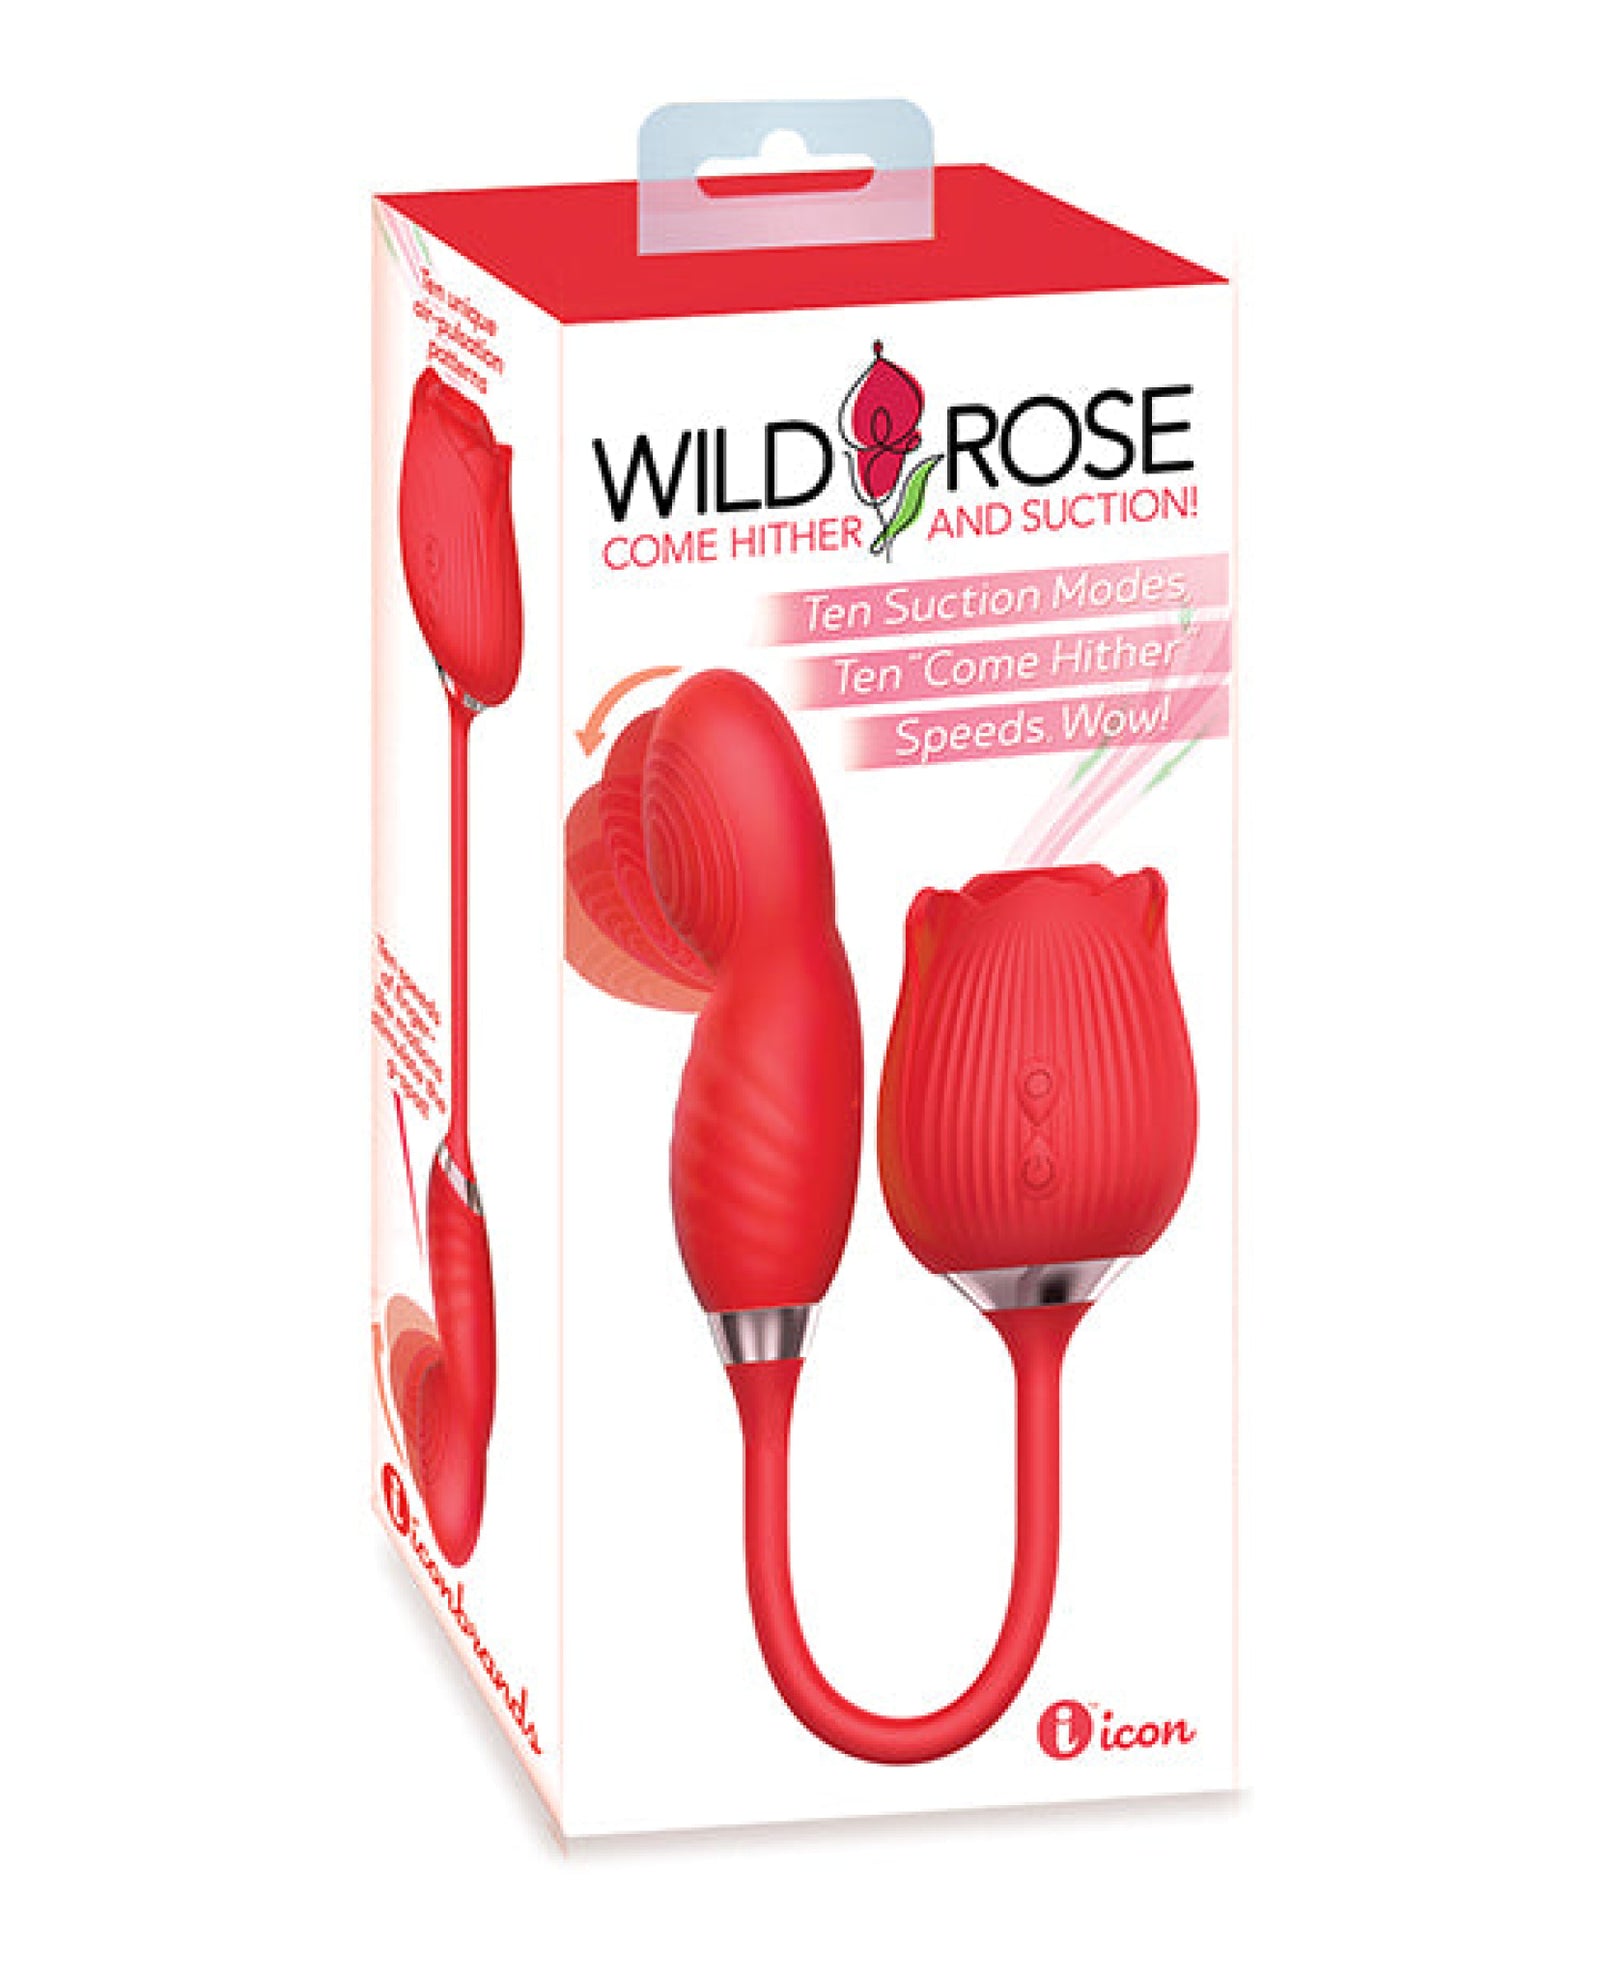 Wild Rose Suction & Come Hither Vibrator - Red Icon